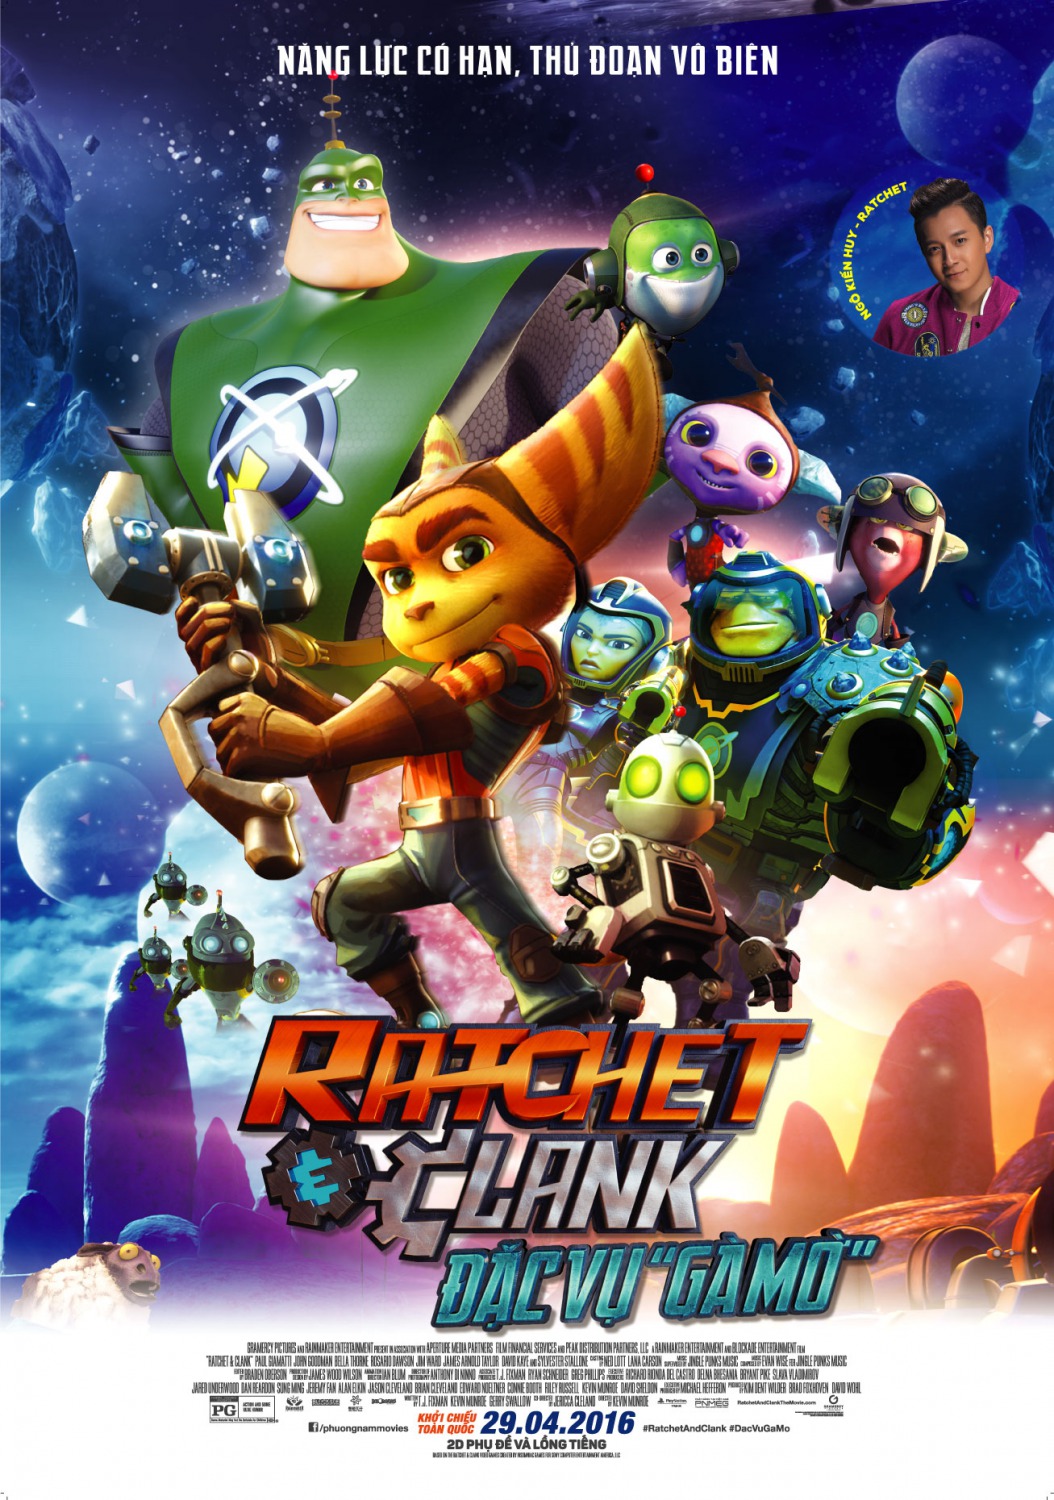 Extra Large Movie Poster Image for Ratchet and Clank (#5 of 5)